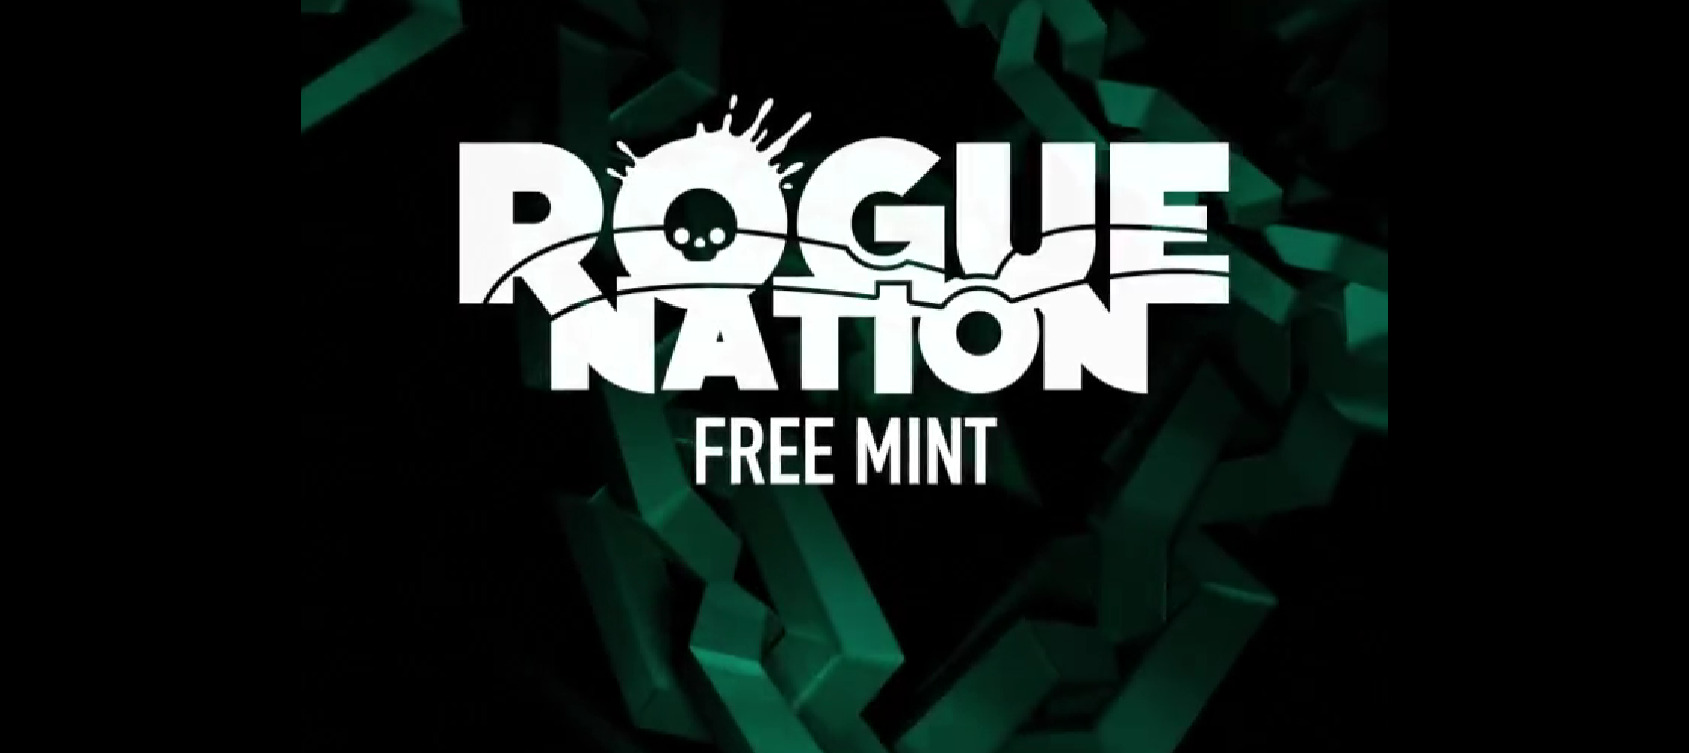 Rogue Nation free mint banner